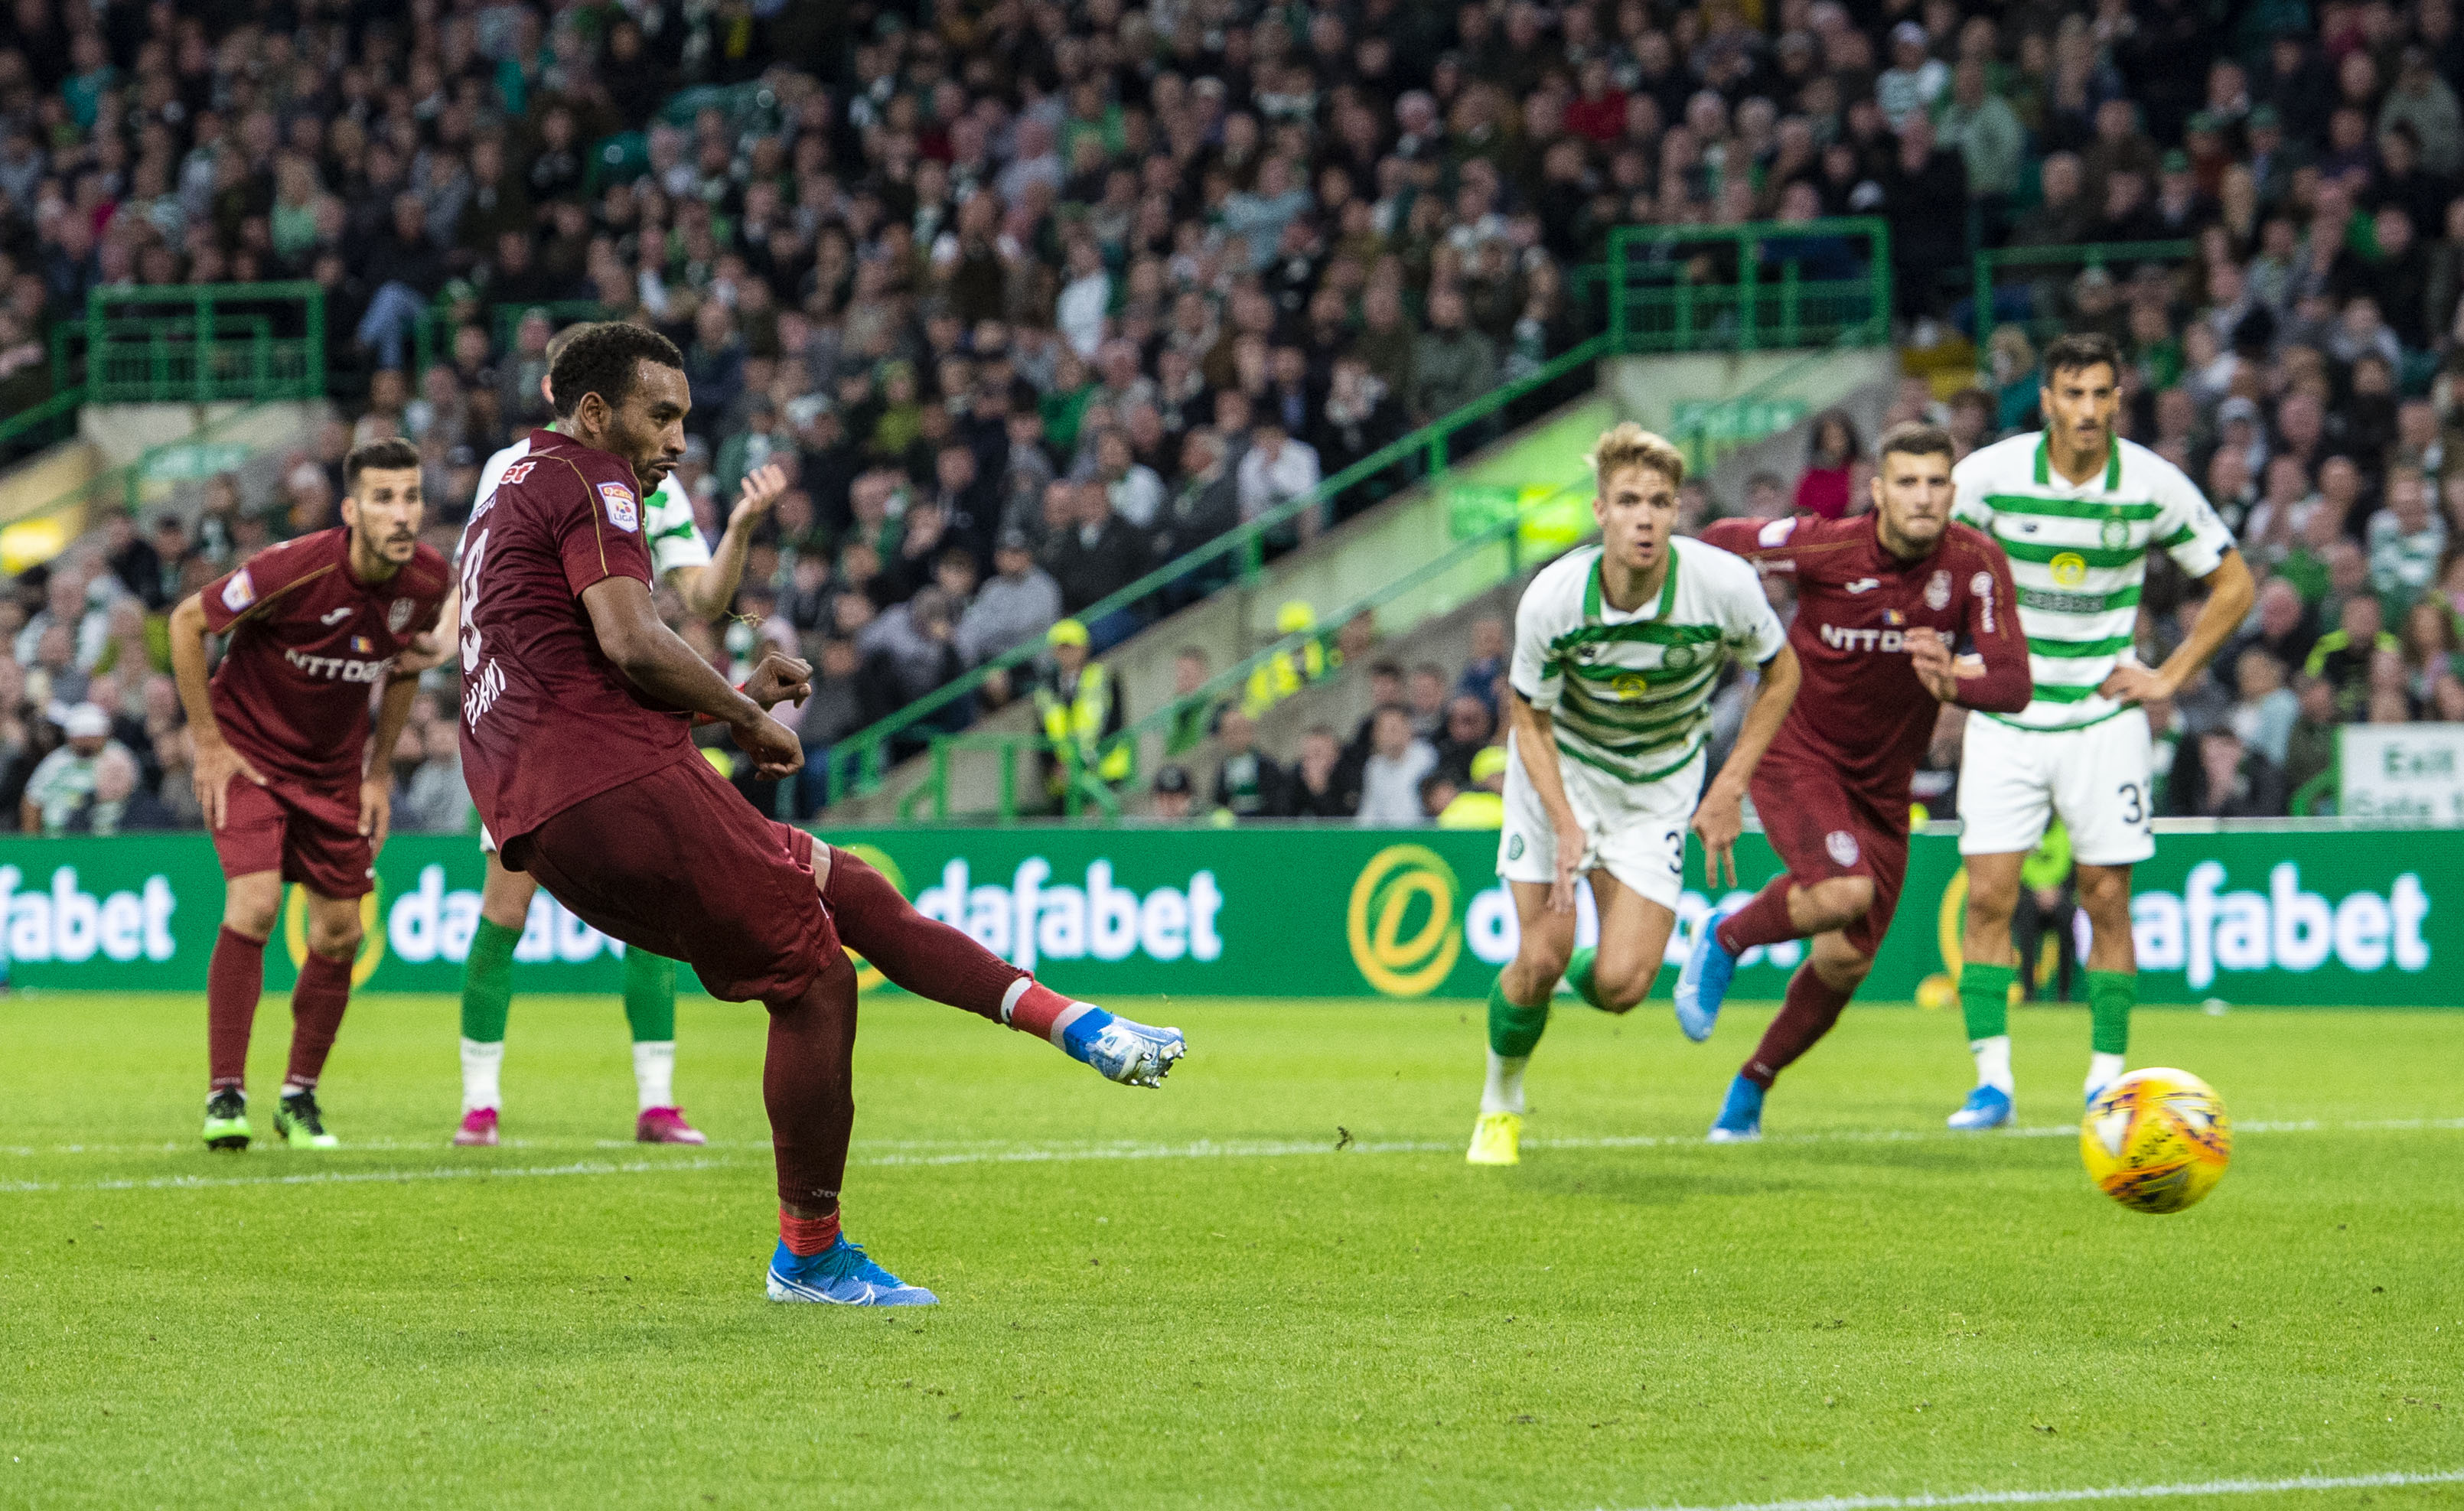 Champions League: Celtic knocked out by Ferencvaros - BBC Sport